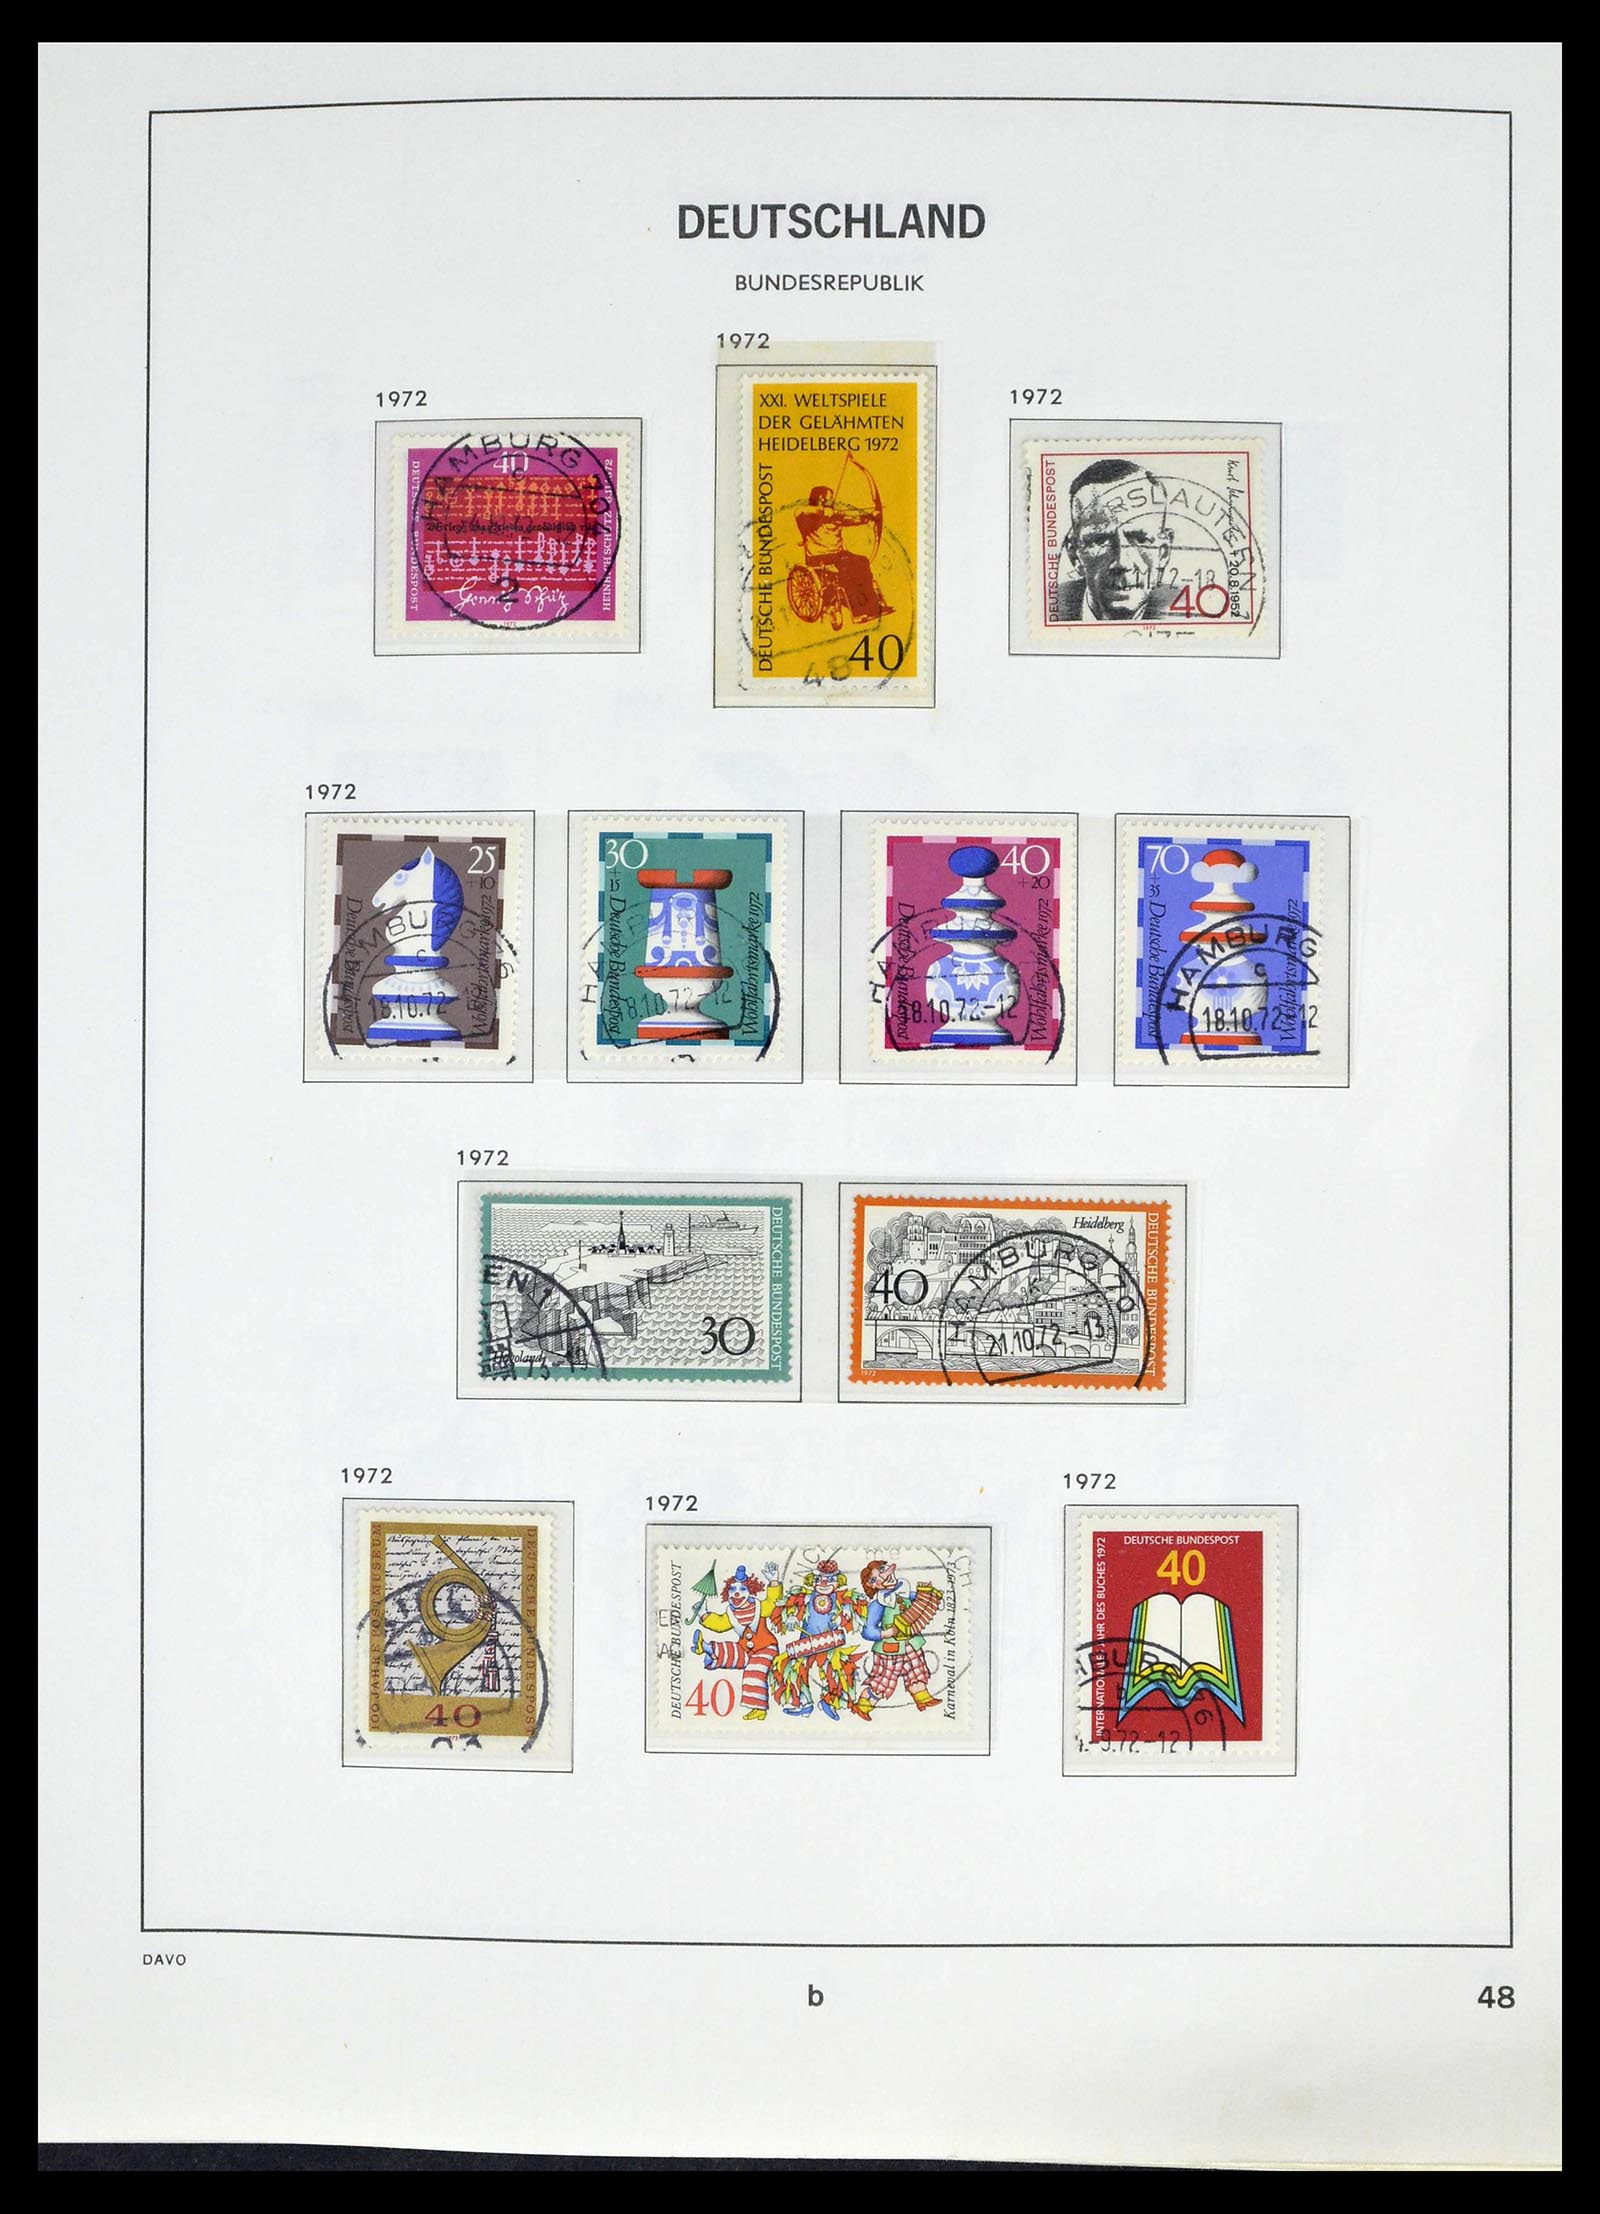 39326 0047 - Stamp collection 39326 Bundespost 1949-2003.